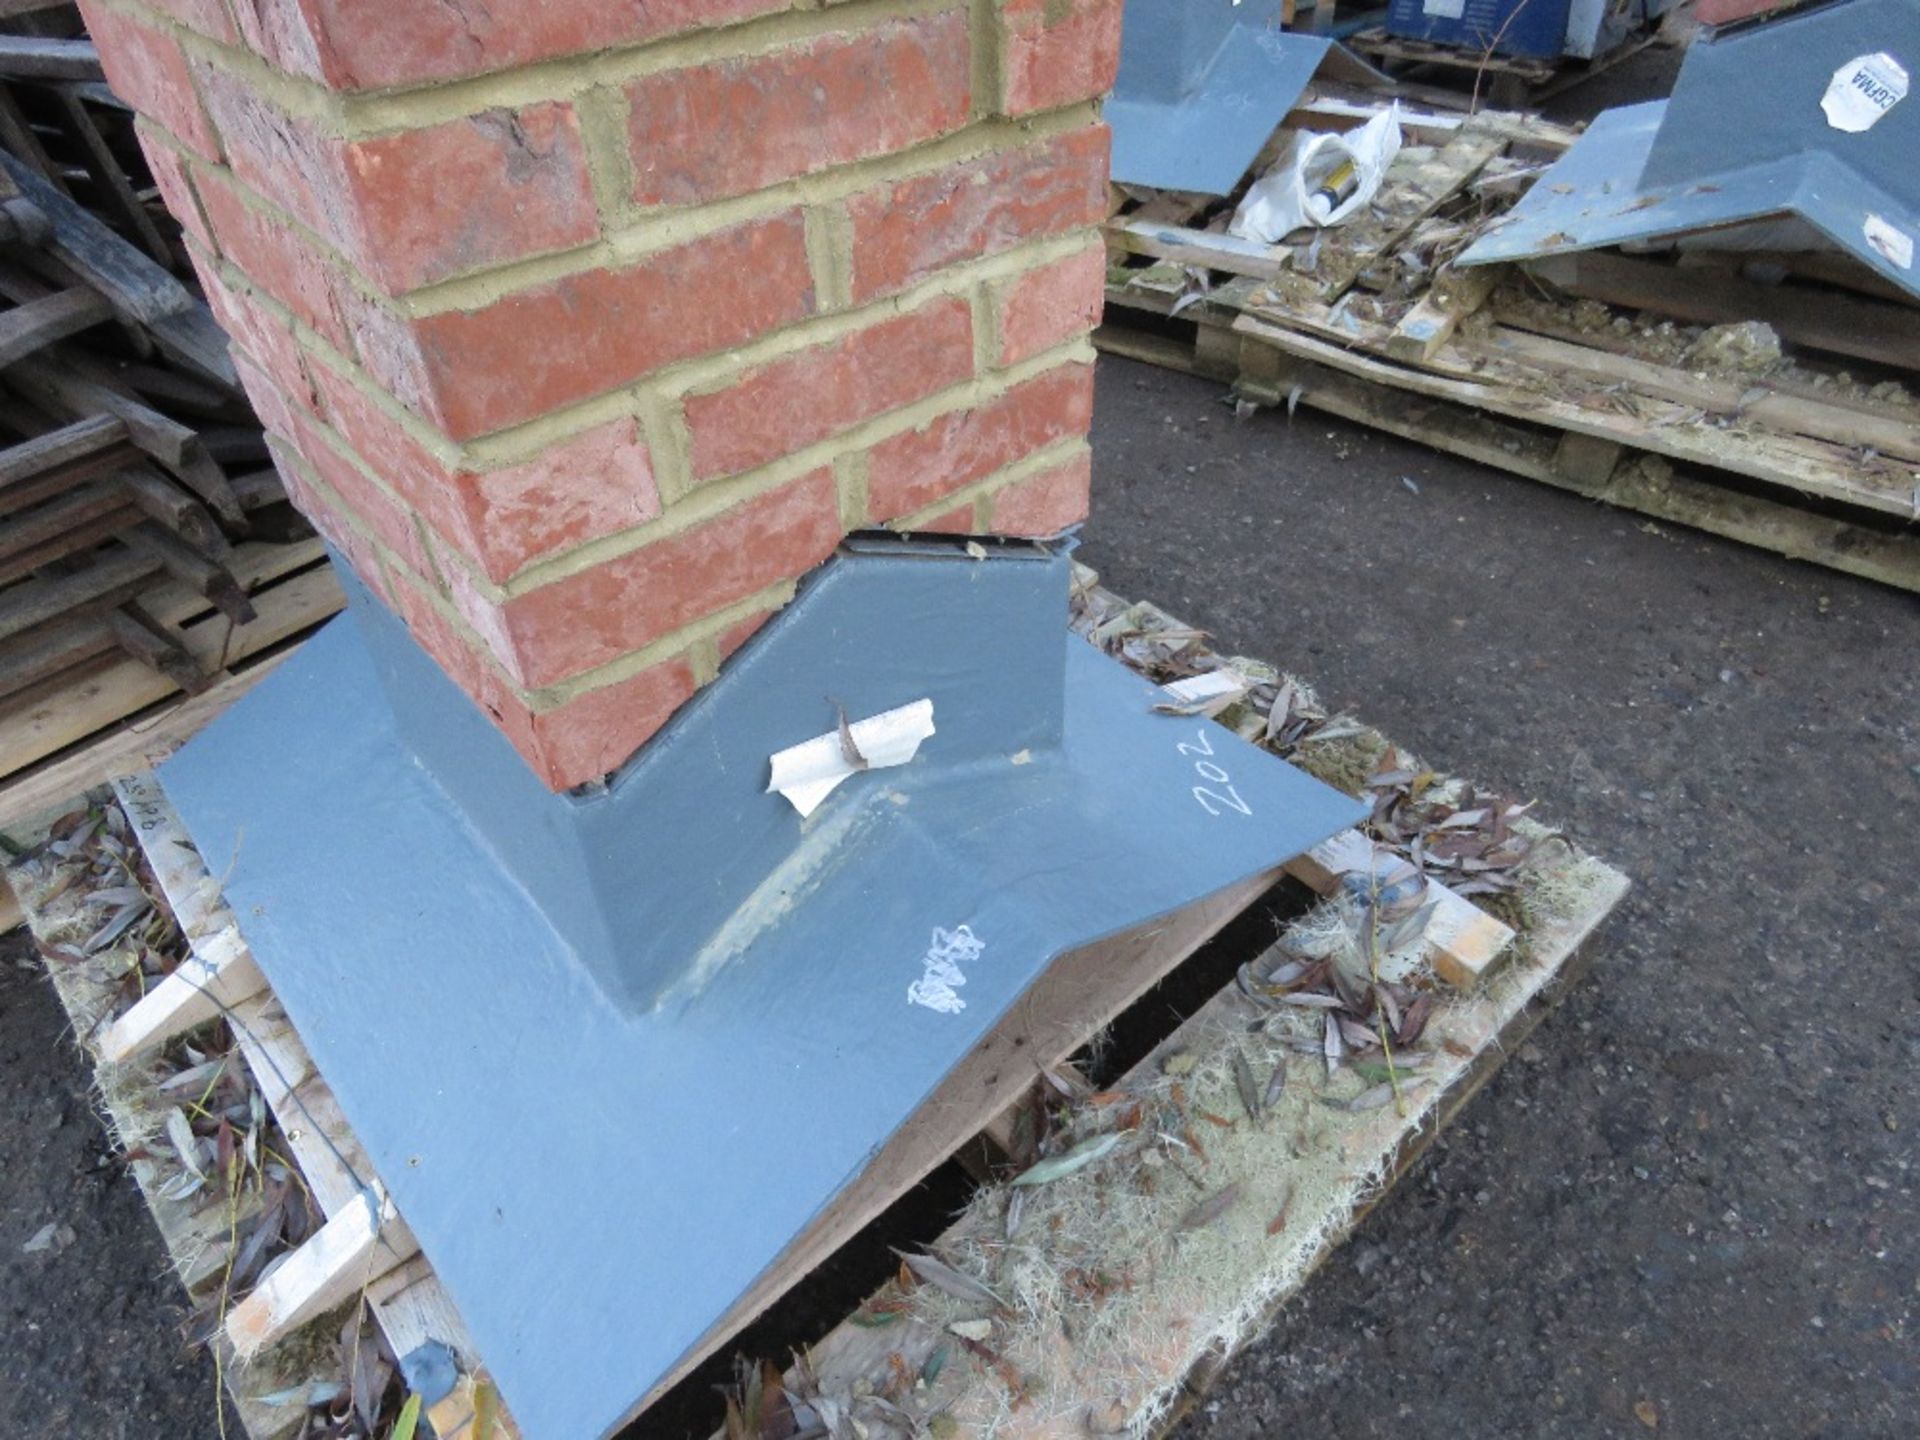 CGFMA FIBRE GLASS CHIMNEY STACK. GRP CENTRE AND BASE WITH REAL BRICK FACING. BELIEVED TO BE 25 DEGR - Image 3 of 4